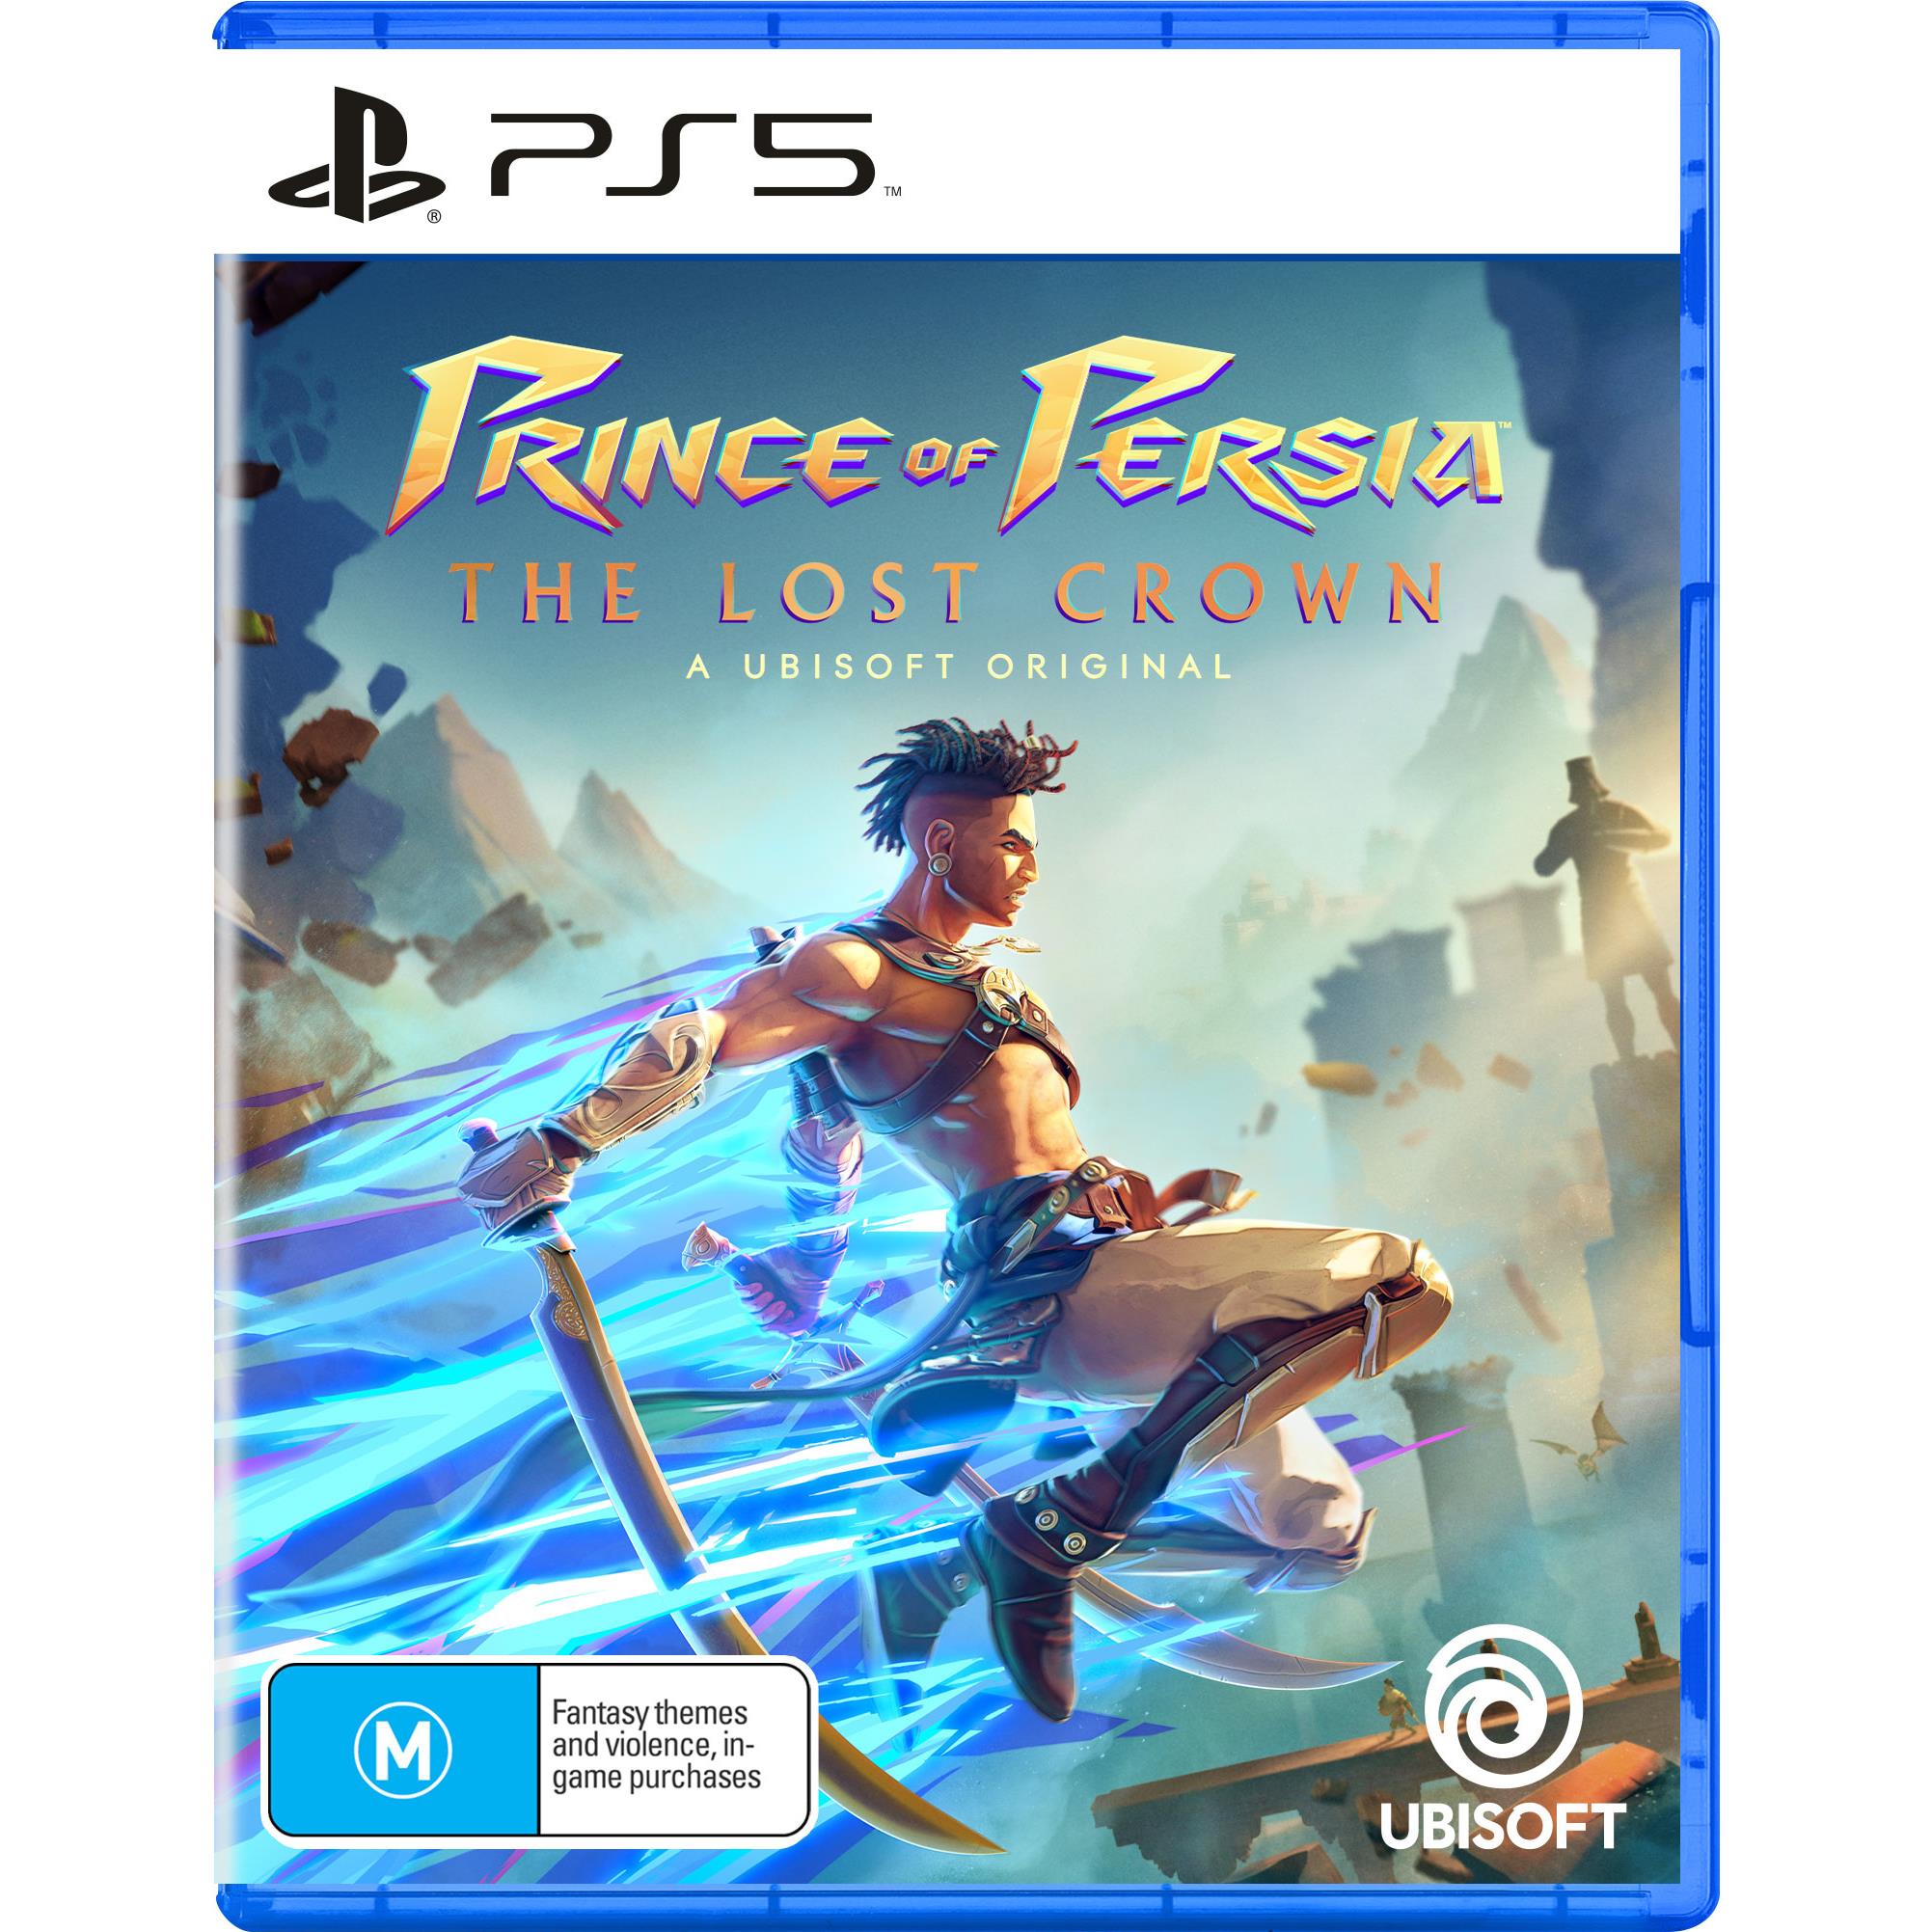 prince of persia: the lost crown